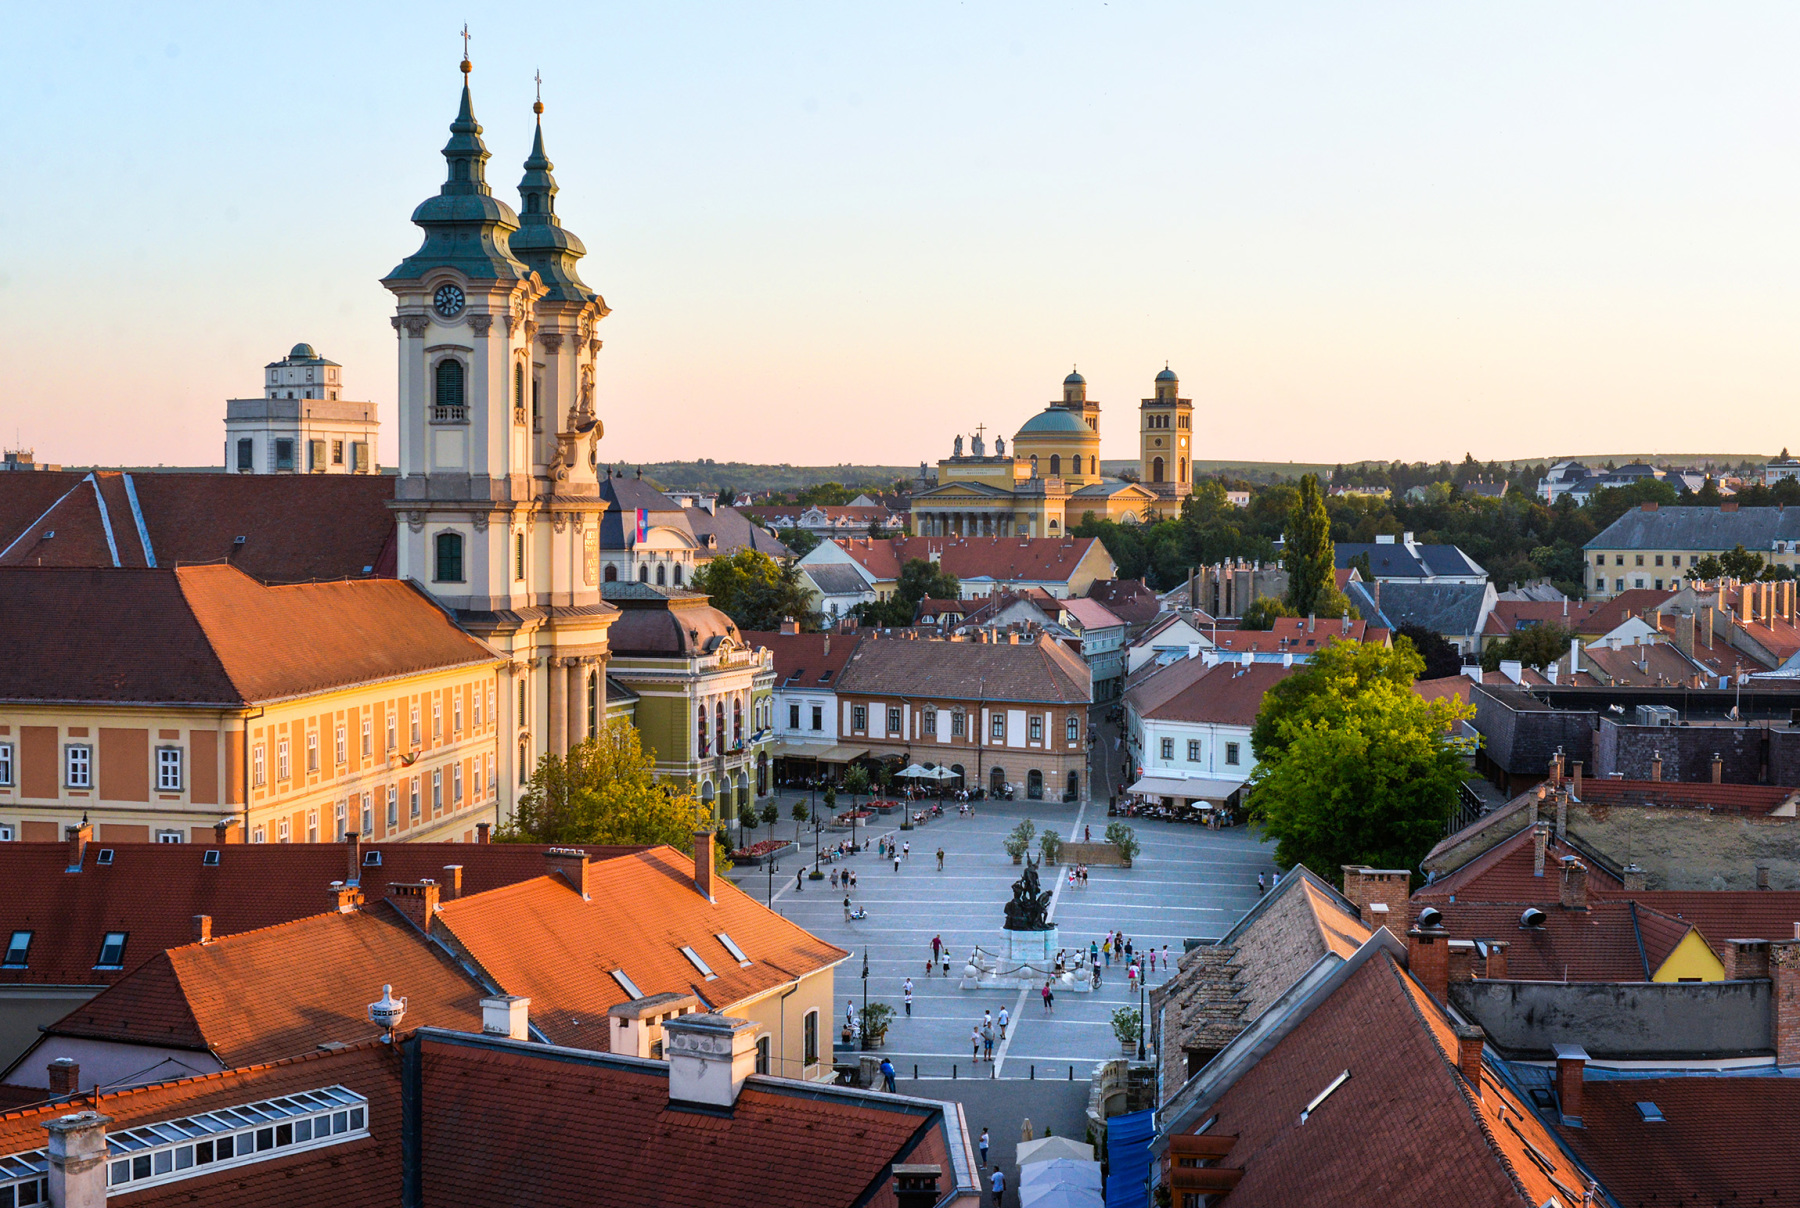 The picturesque streets of Eger – one day trip